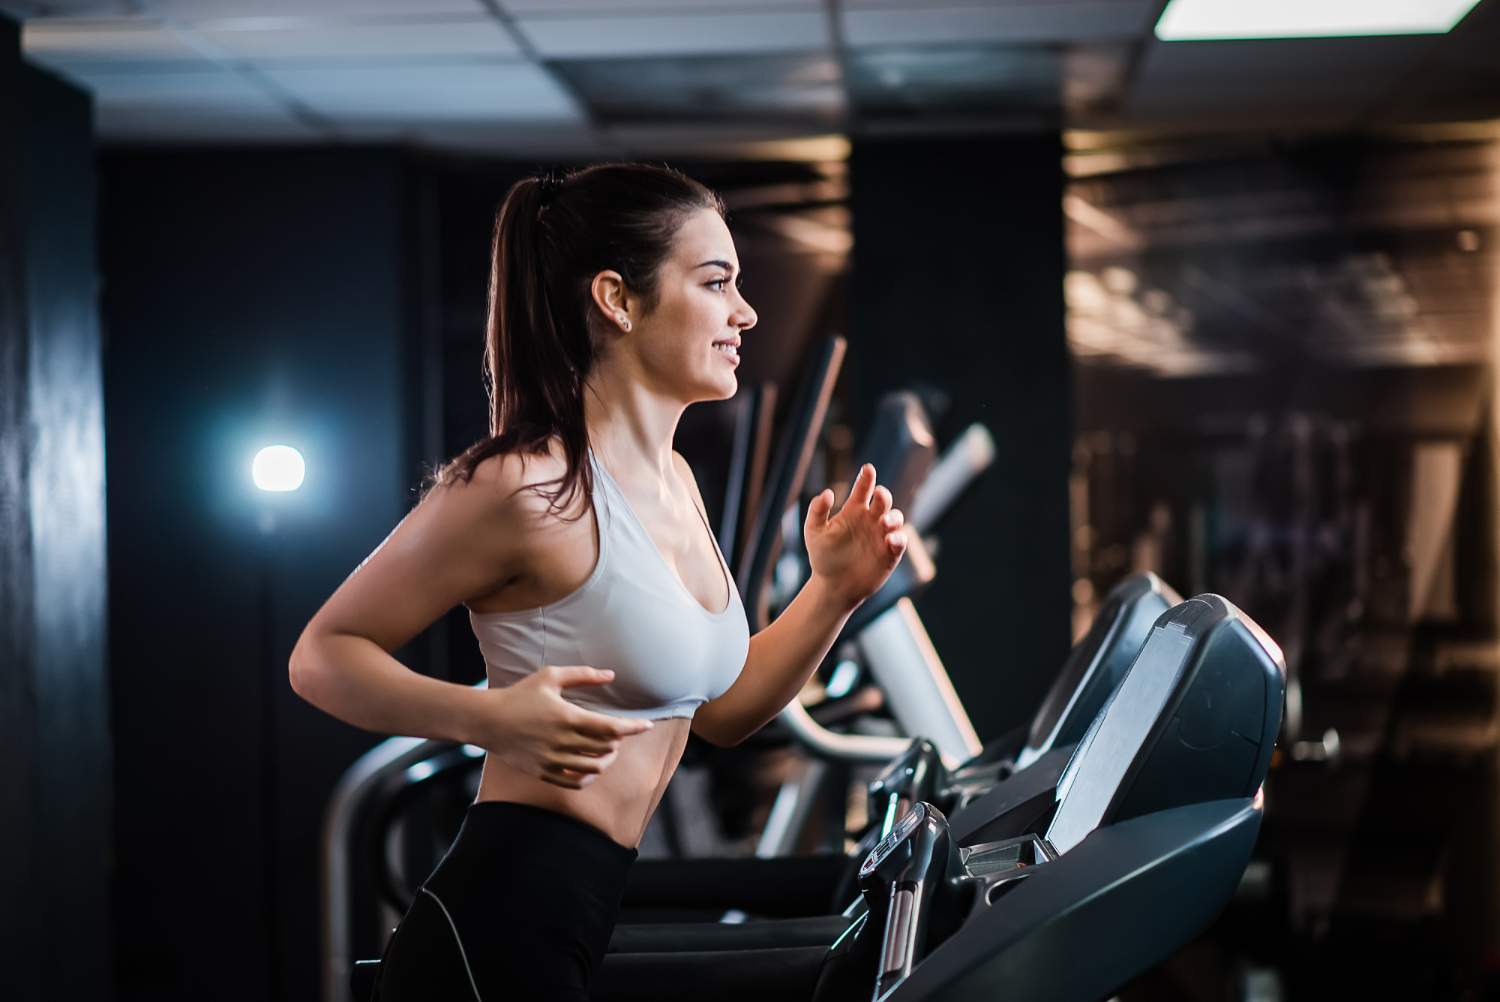 young sports woman with ponytail working out gym running treadmill side view